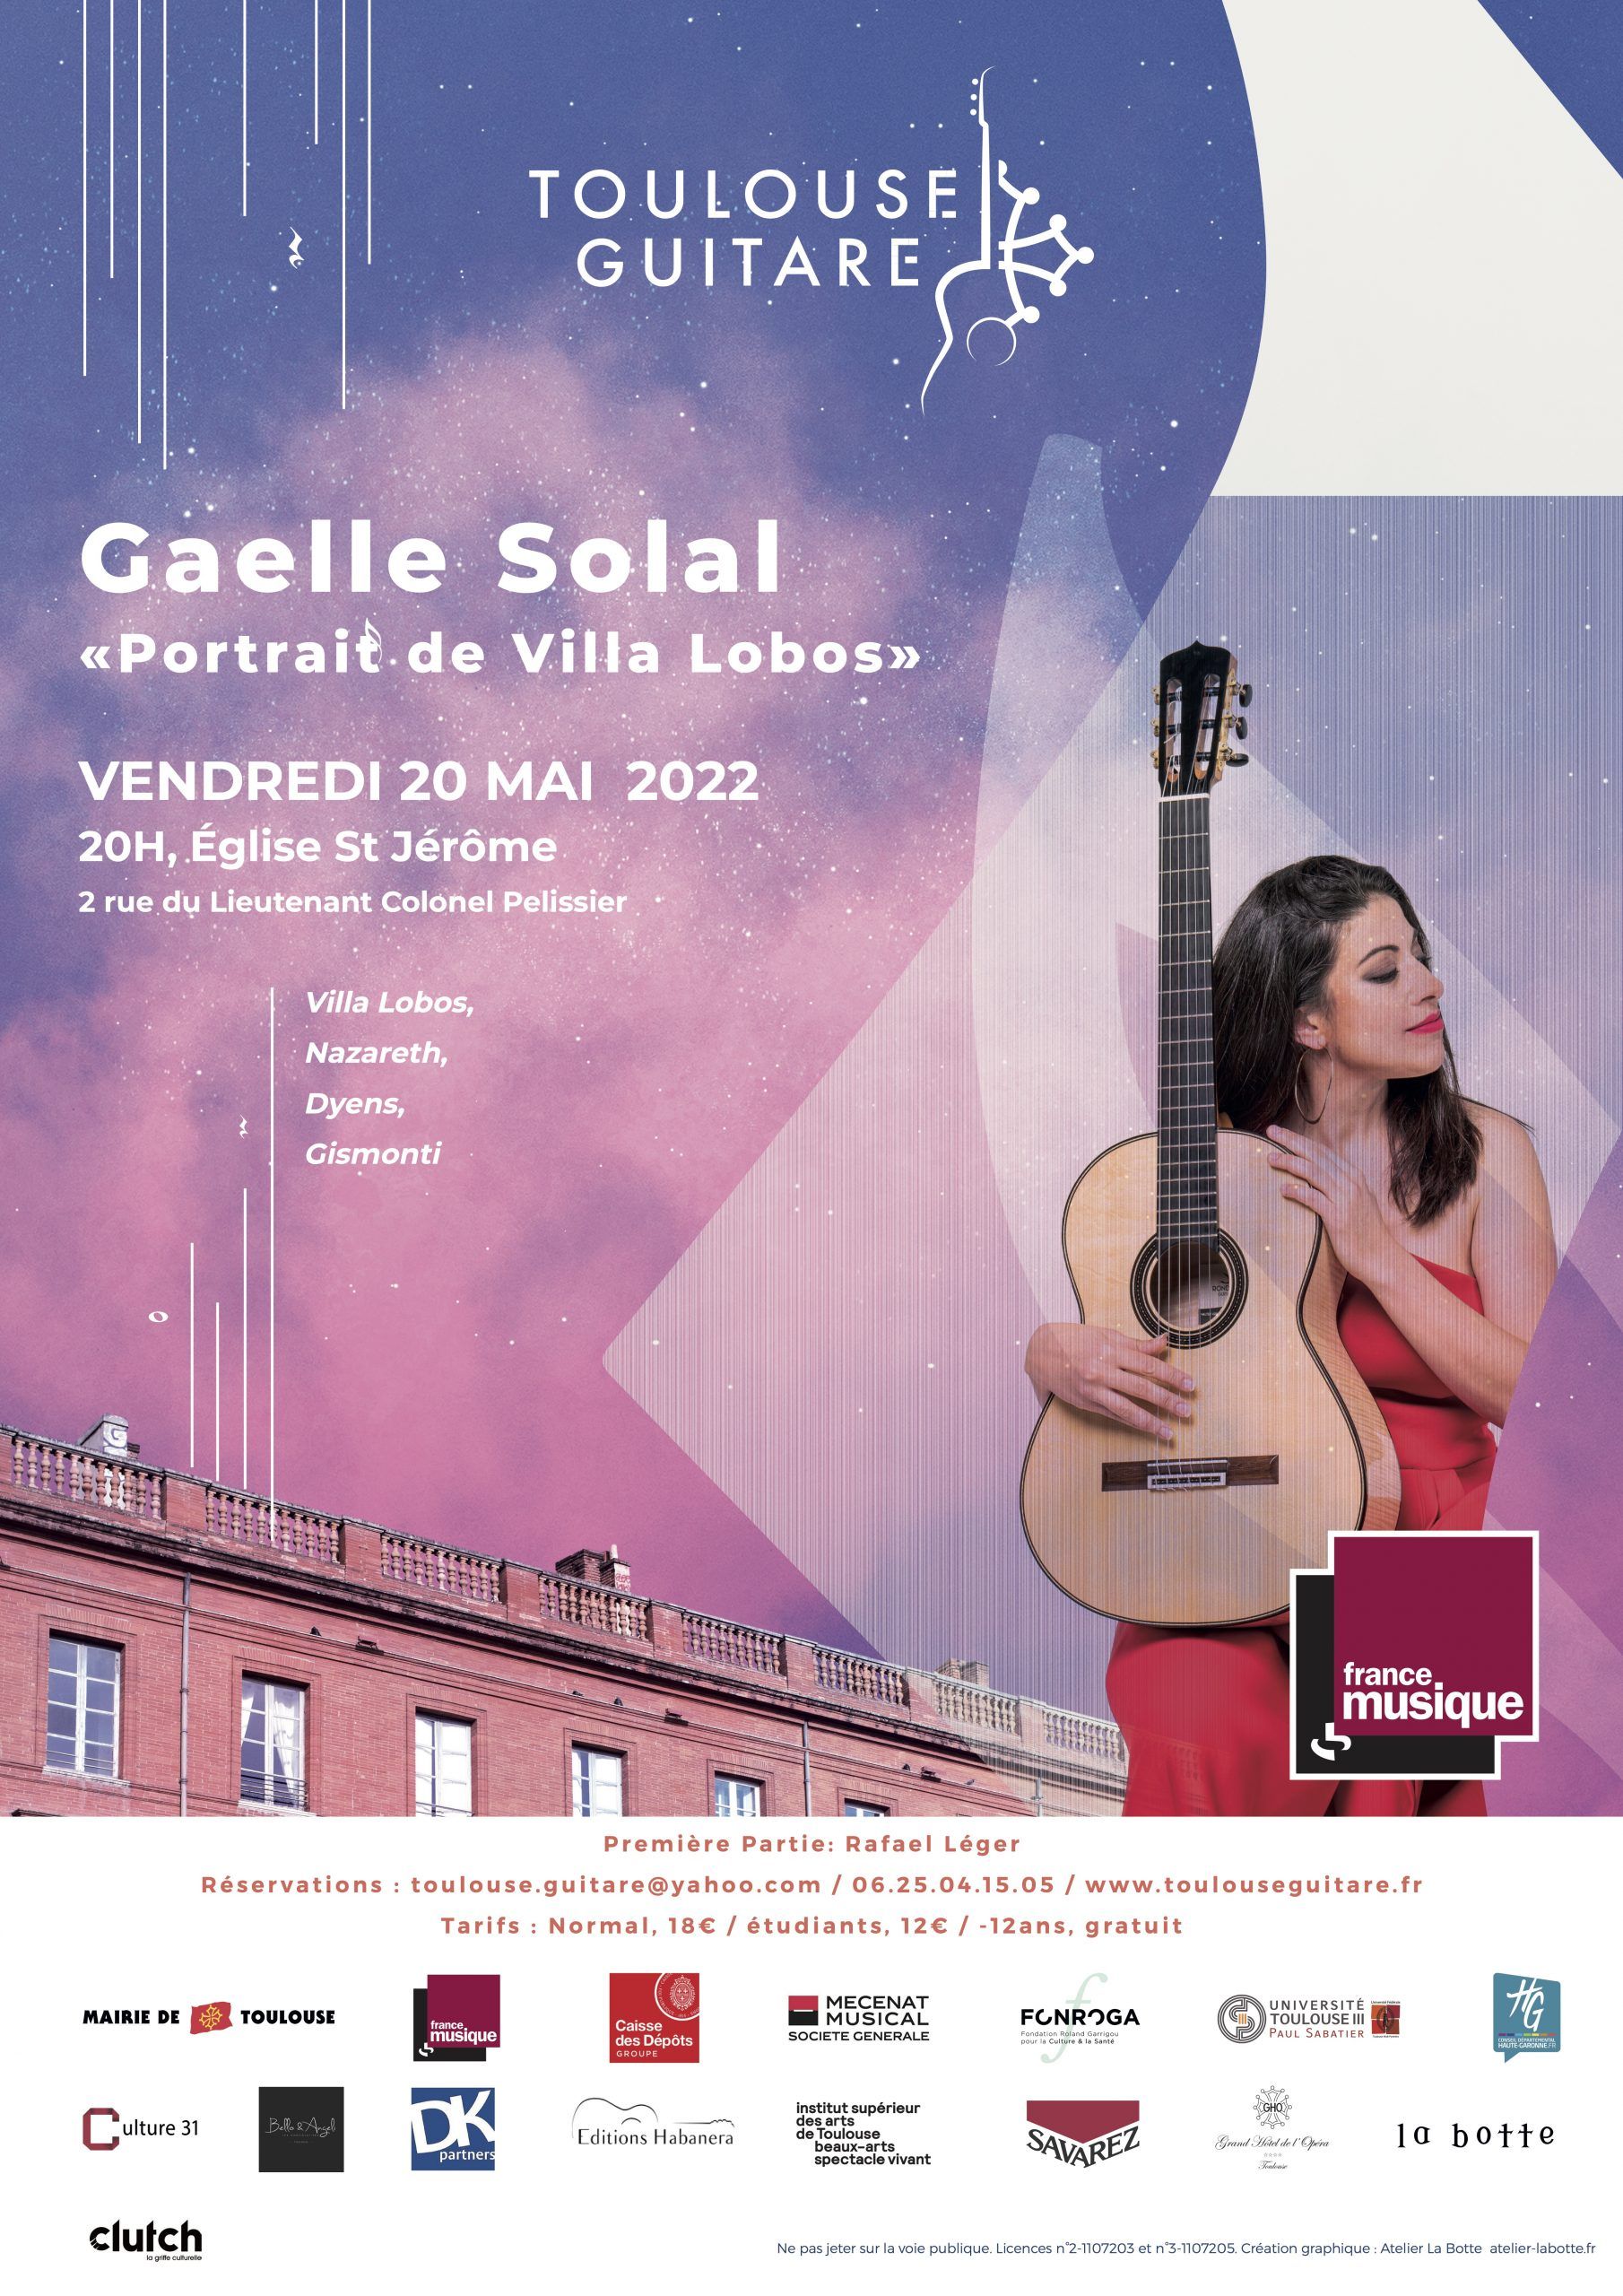 Toulouse Guitare - Gaelle Solal